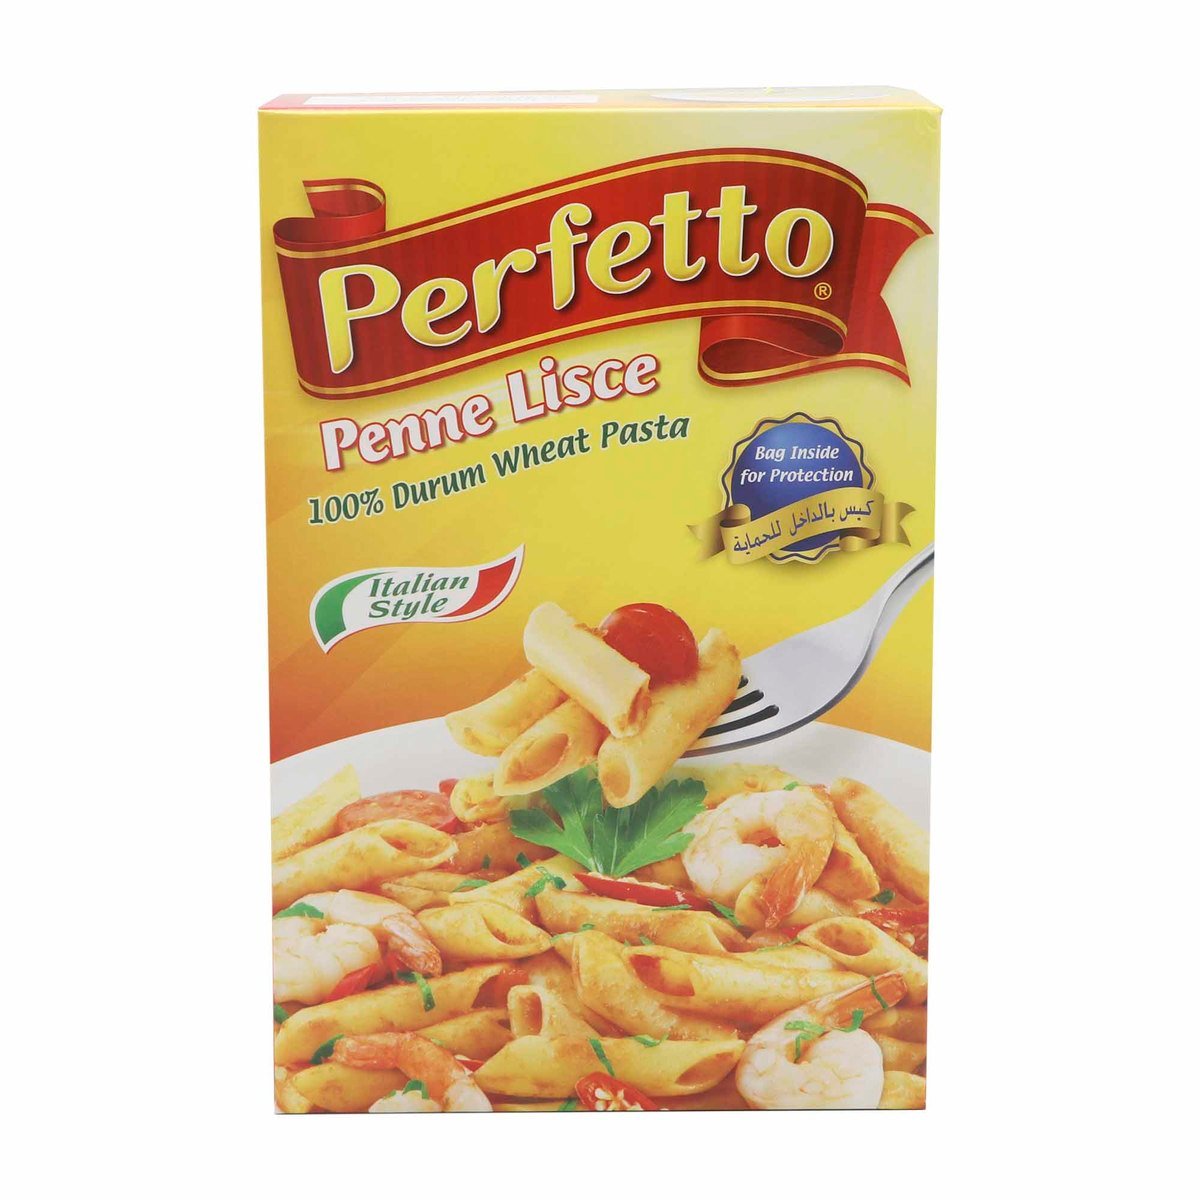 Perfetto Penne Lisce 500g